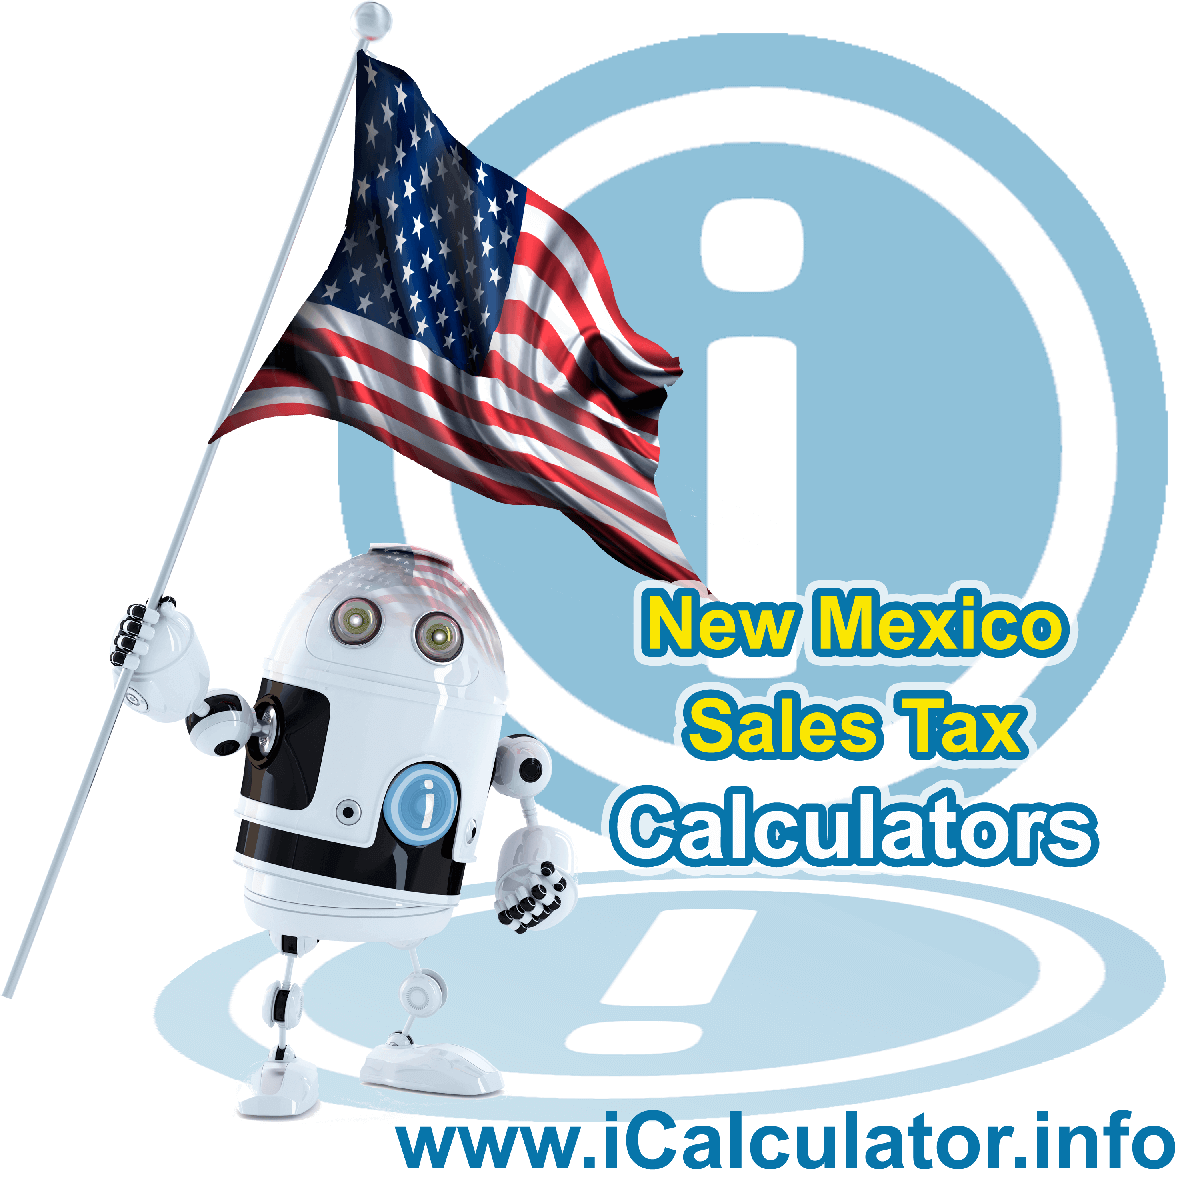 Eddy County Sales Rates: This image illustrates a calculator robot calculating Eddy County sales tax manually using the Eddy County Sales Tax Formula. You can use this information to calculate Eddy County Sales Tax manually or use the Eddy County Sales Tax Calculator to calculate sales tax online.